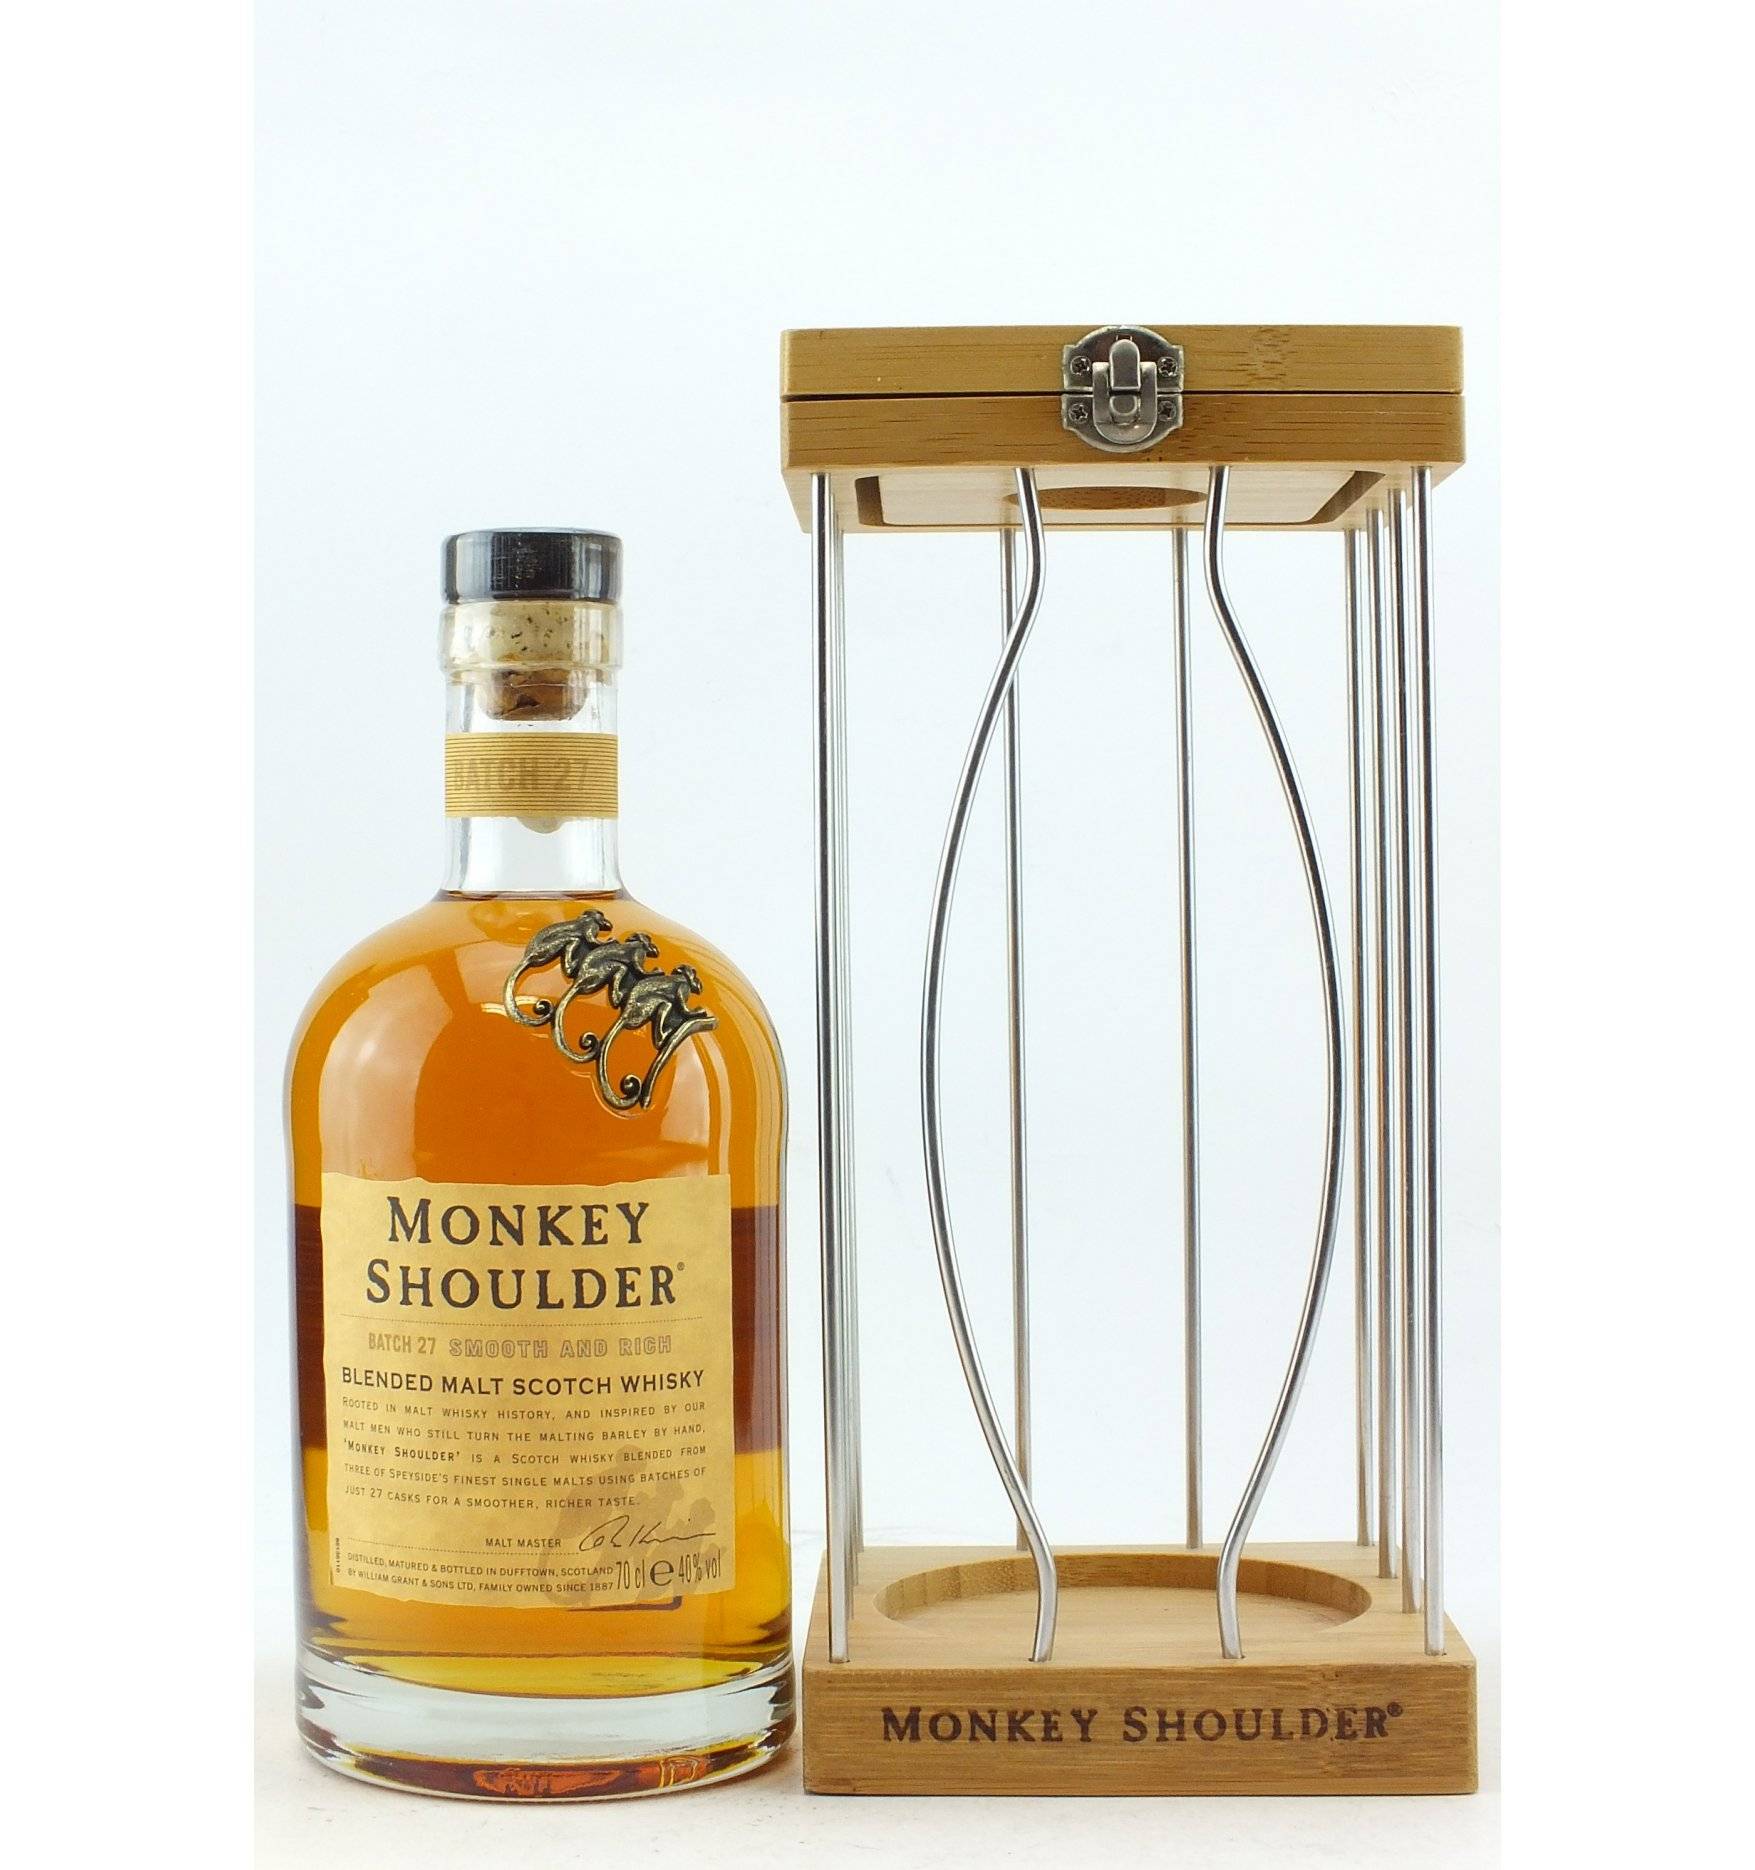 Monkey Shoulder - Batch 27 Cage Limited Edition - Just Whisky Auctions